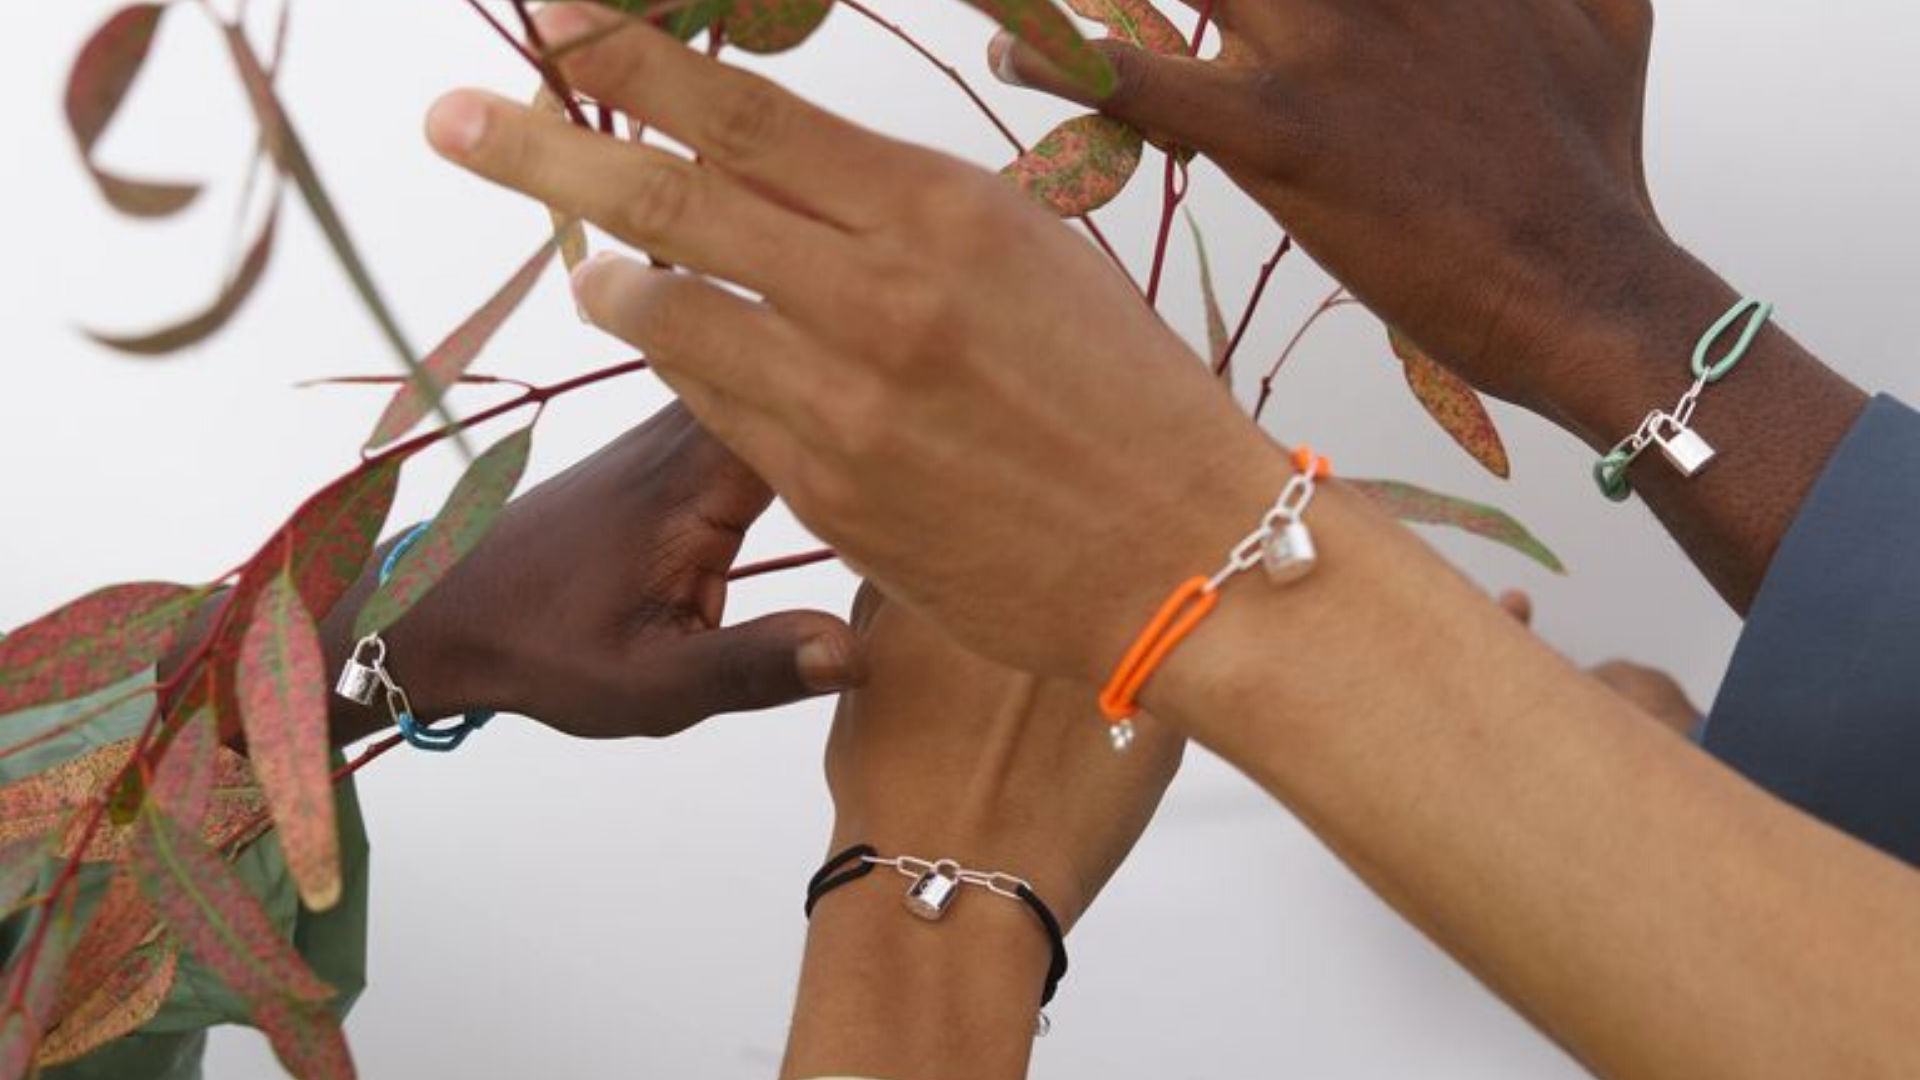 Virgil Abloh's Louis Vuitton Bracelets Will Provide Funds for Children in  Need